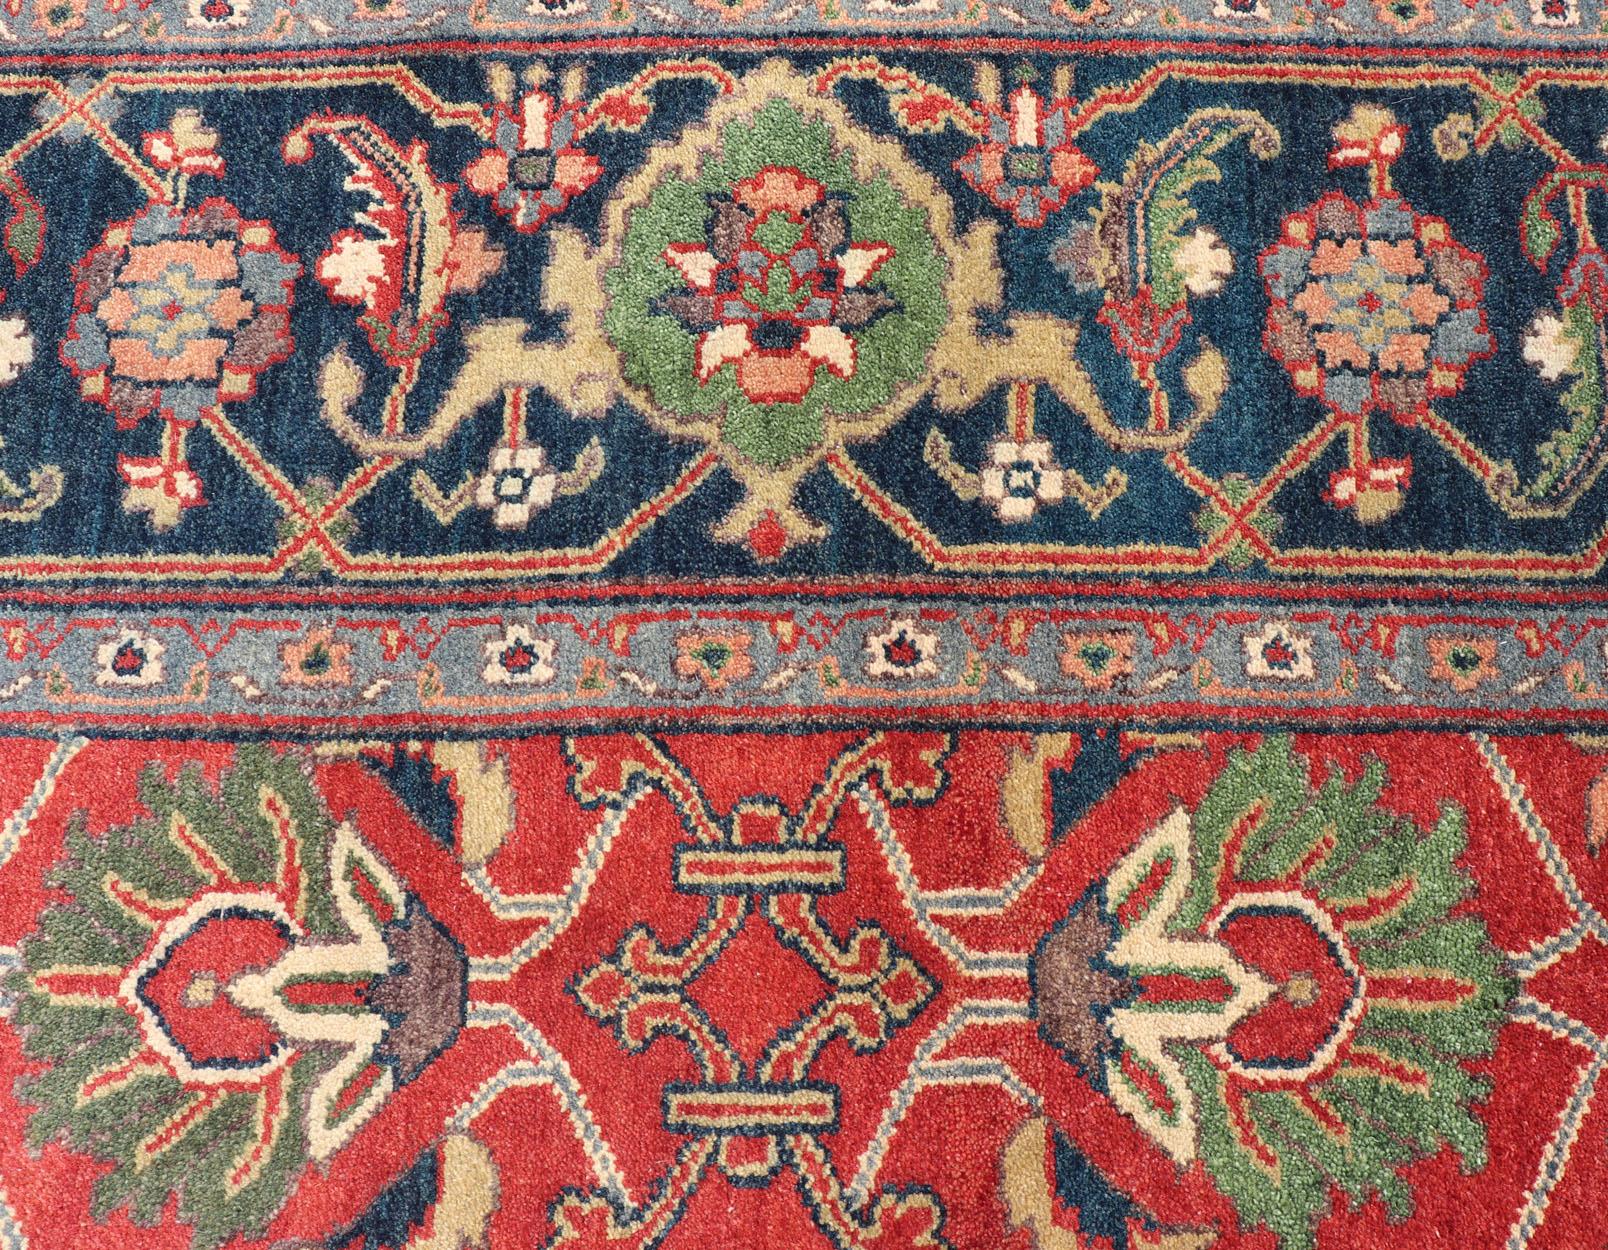 Reproduction Sultanabad-Mahal All-over Floral Hand-Knotted Carpet  1